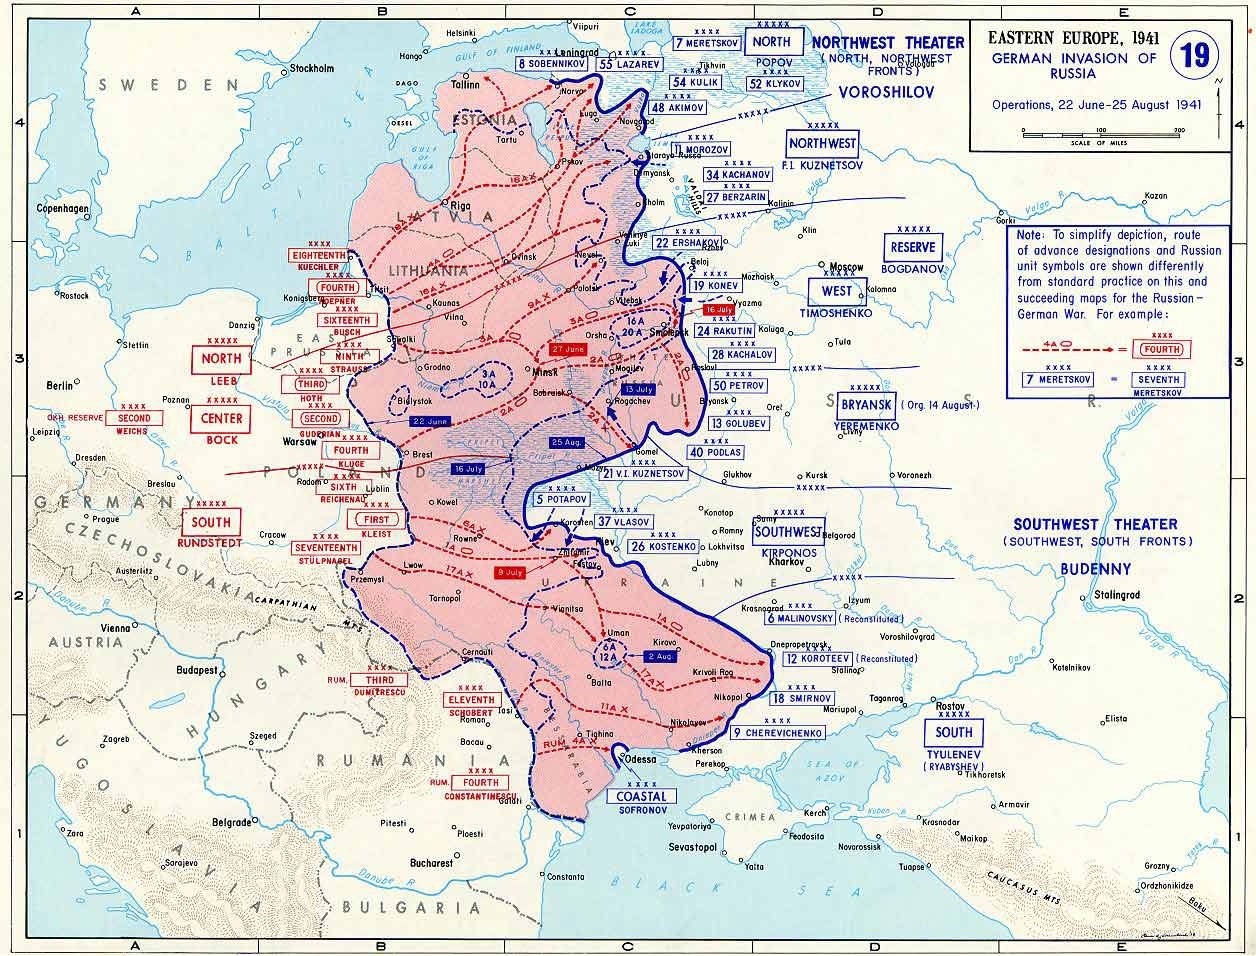 map of actual German advances into USSR, June to August 1941. Source: US Military Academy